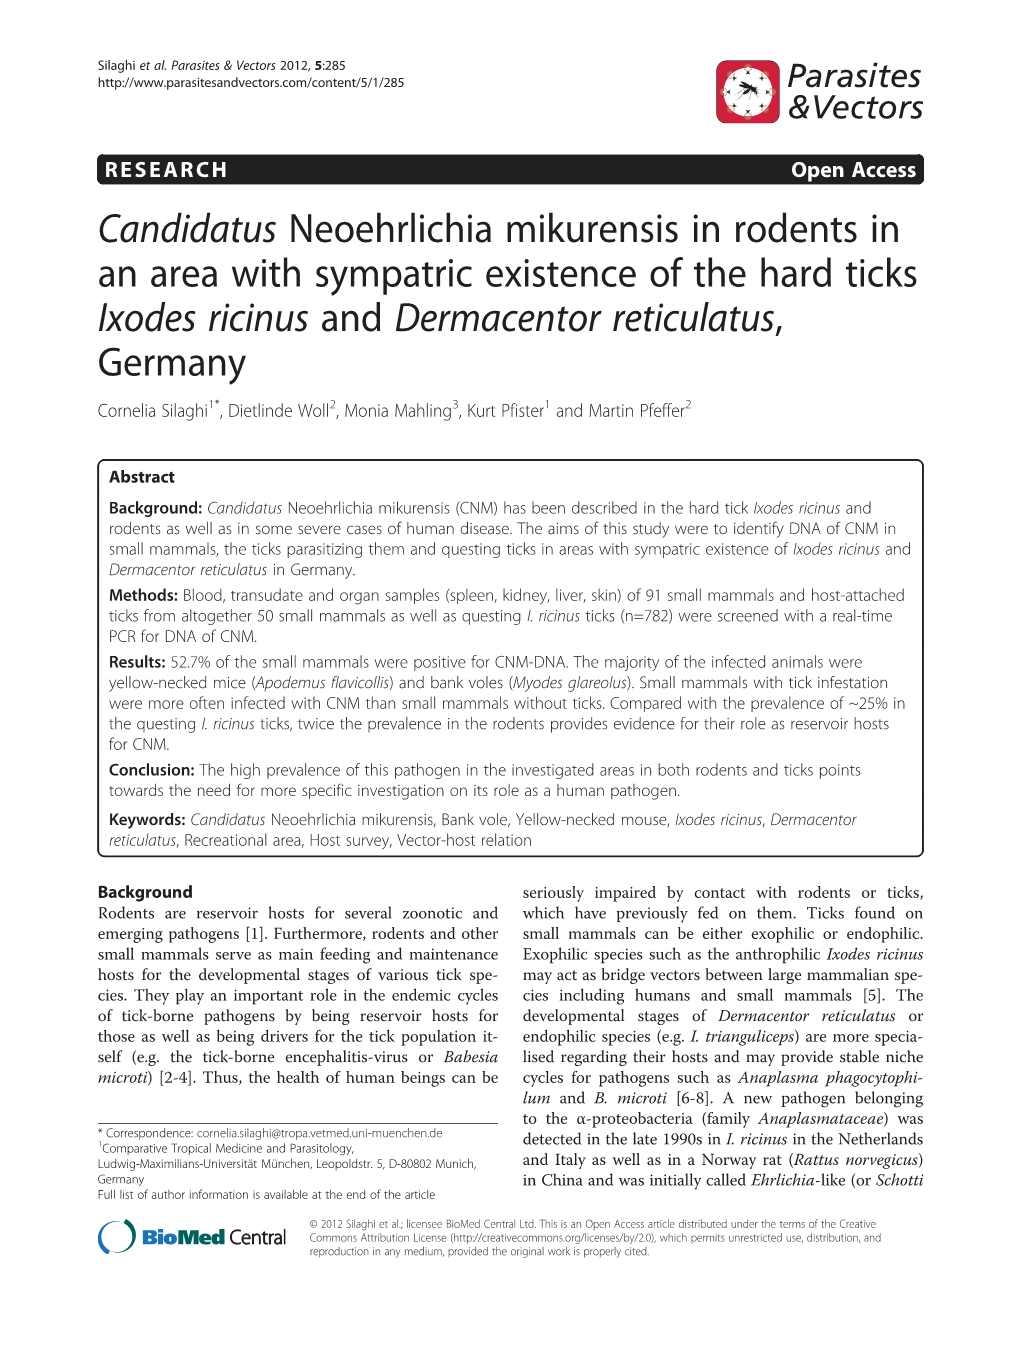 Candidatus Neoehrlichia Mikurensis in Rodents in an Area with Sympatric